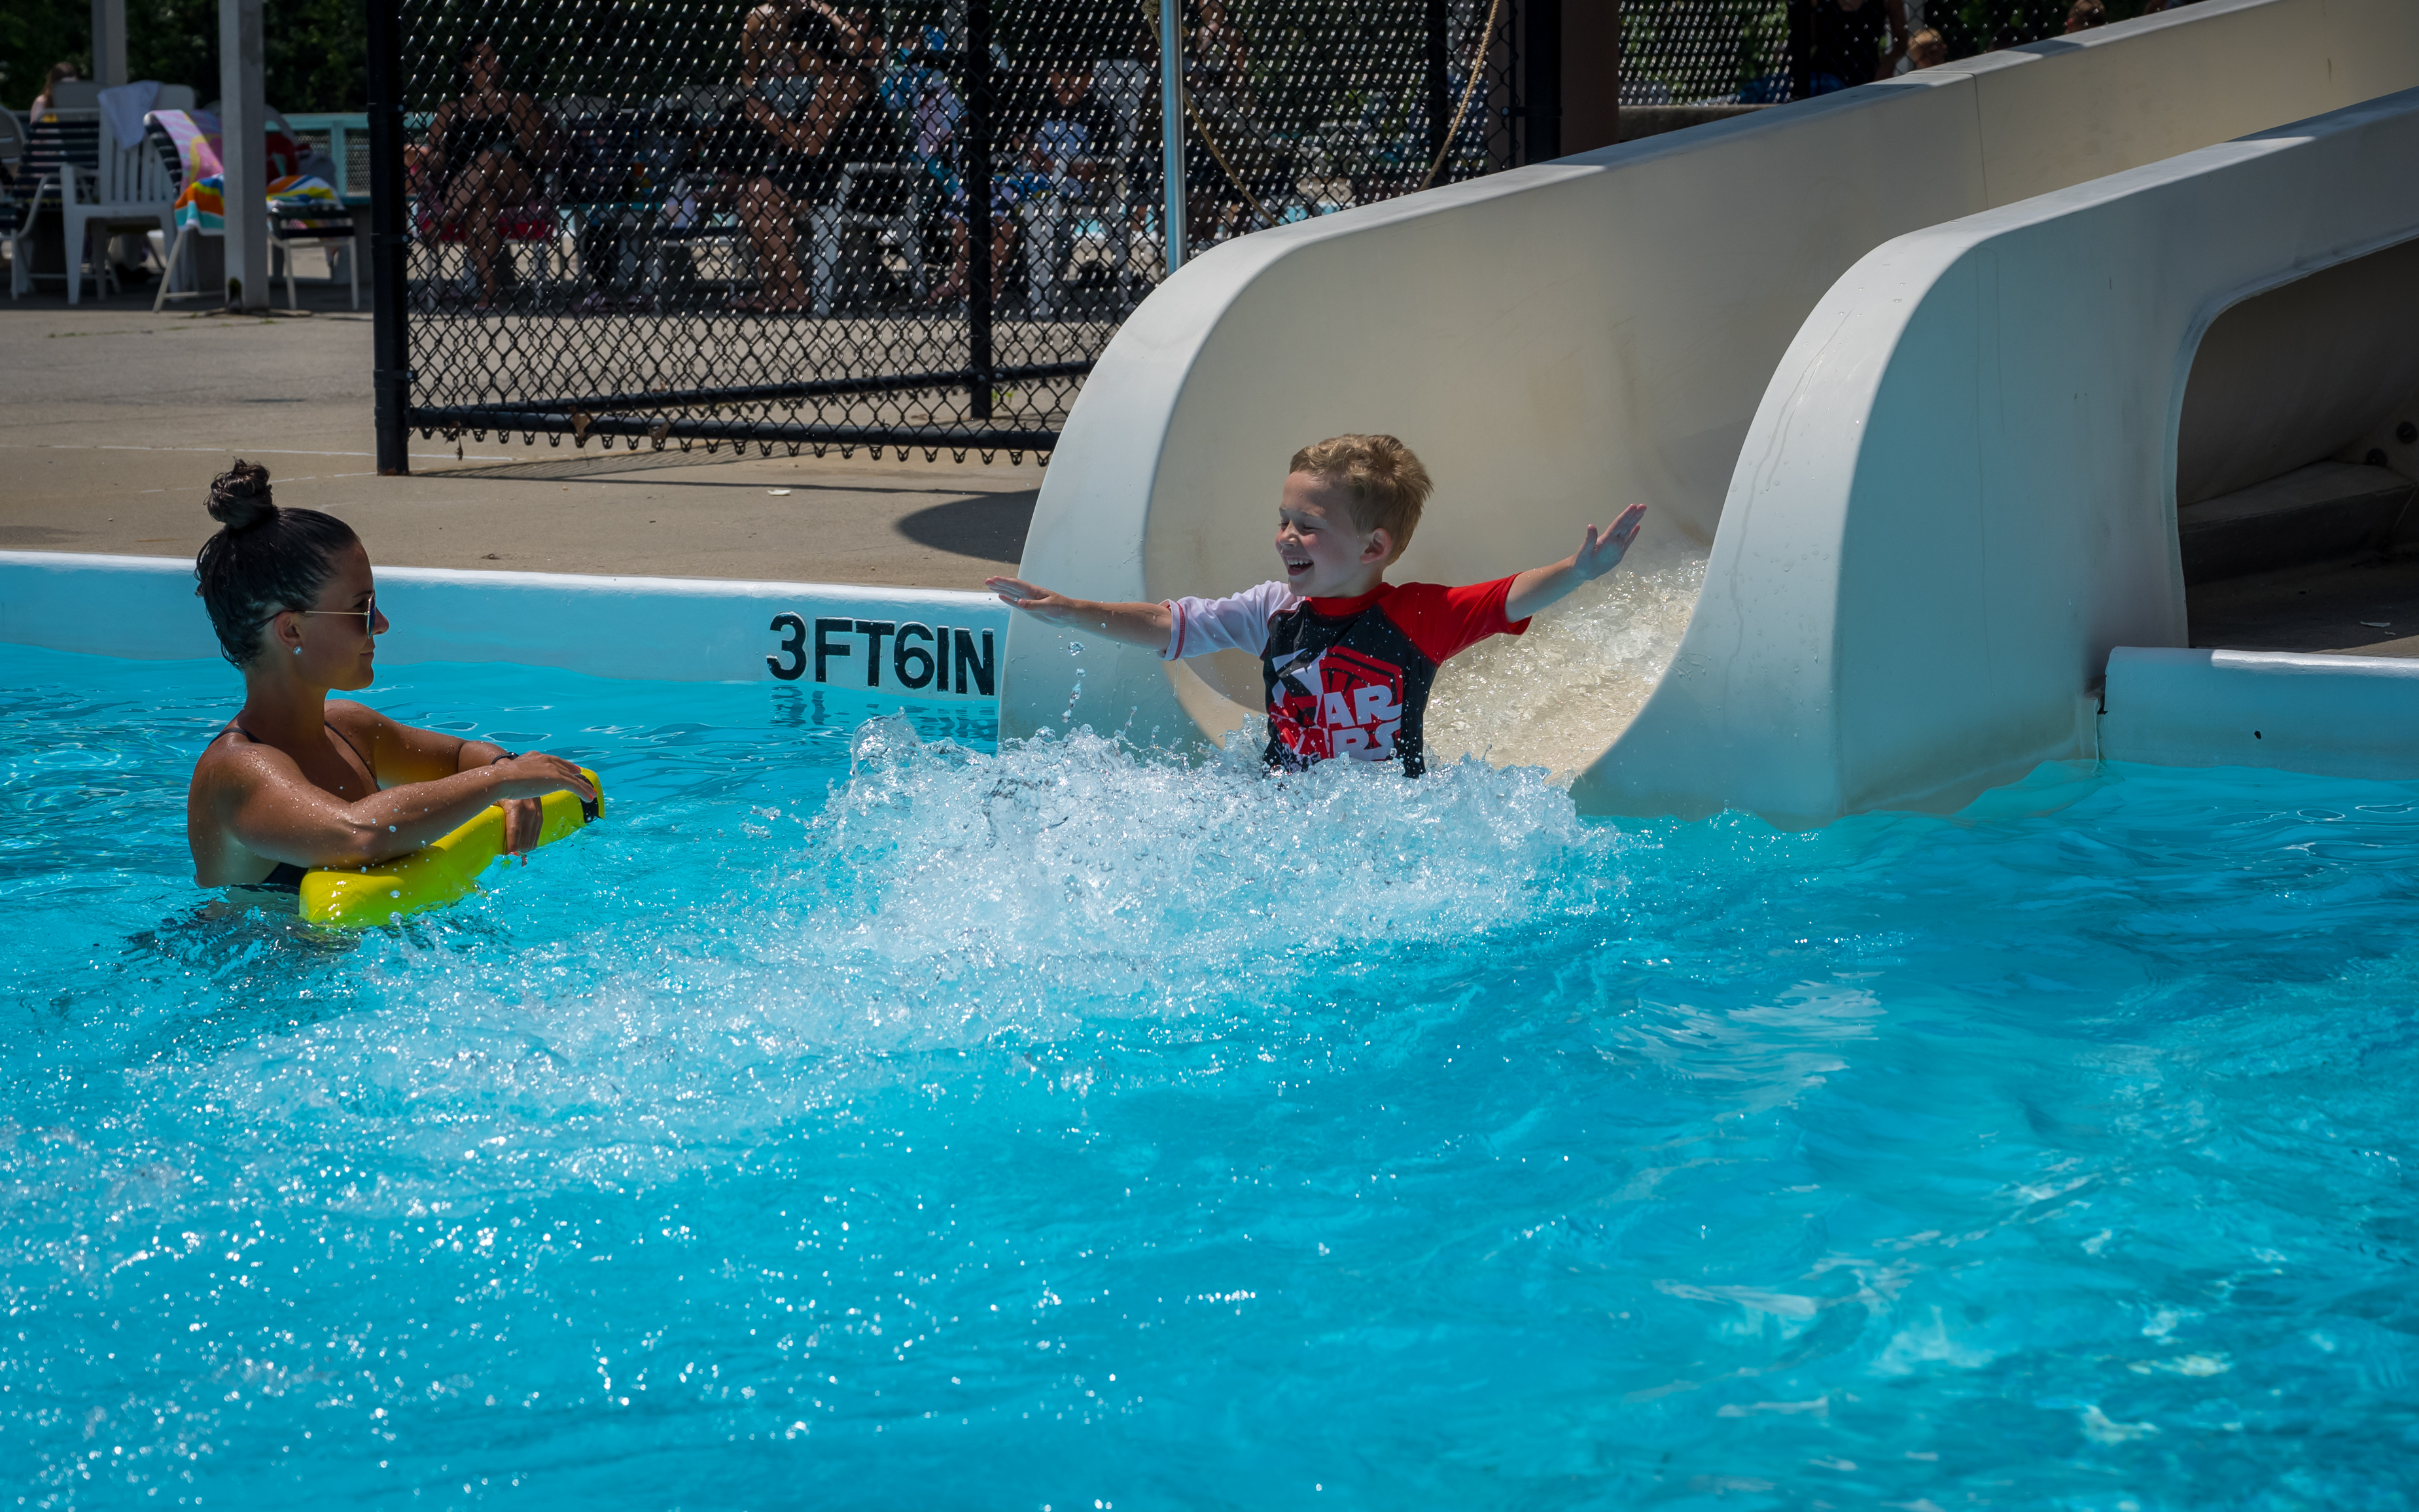 Young boy with a big smile on his face and arms out like an airplane as he cruises toward his descent into the cool blue pool, a lifeguard to his left ready to catch him if needed.